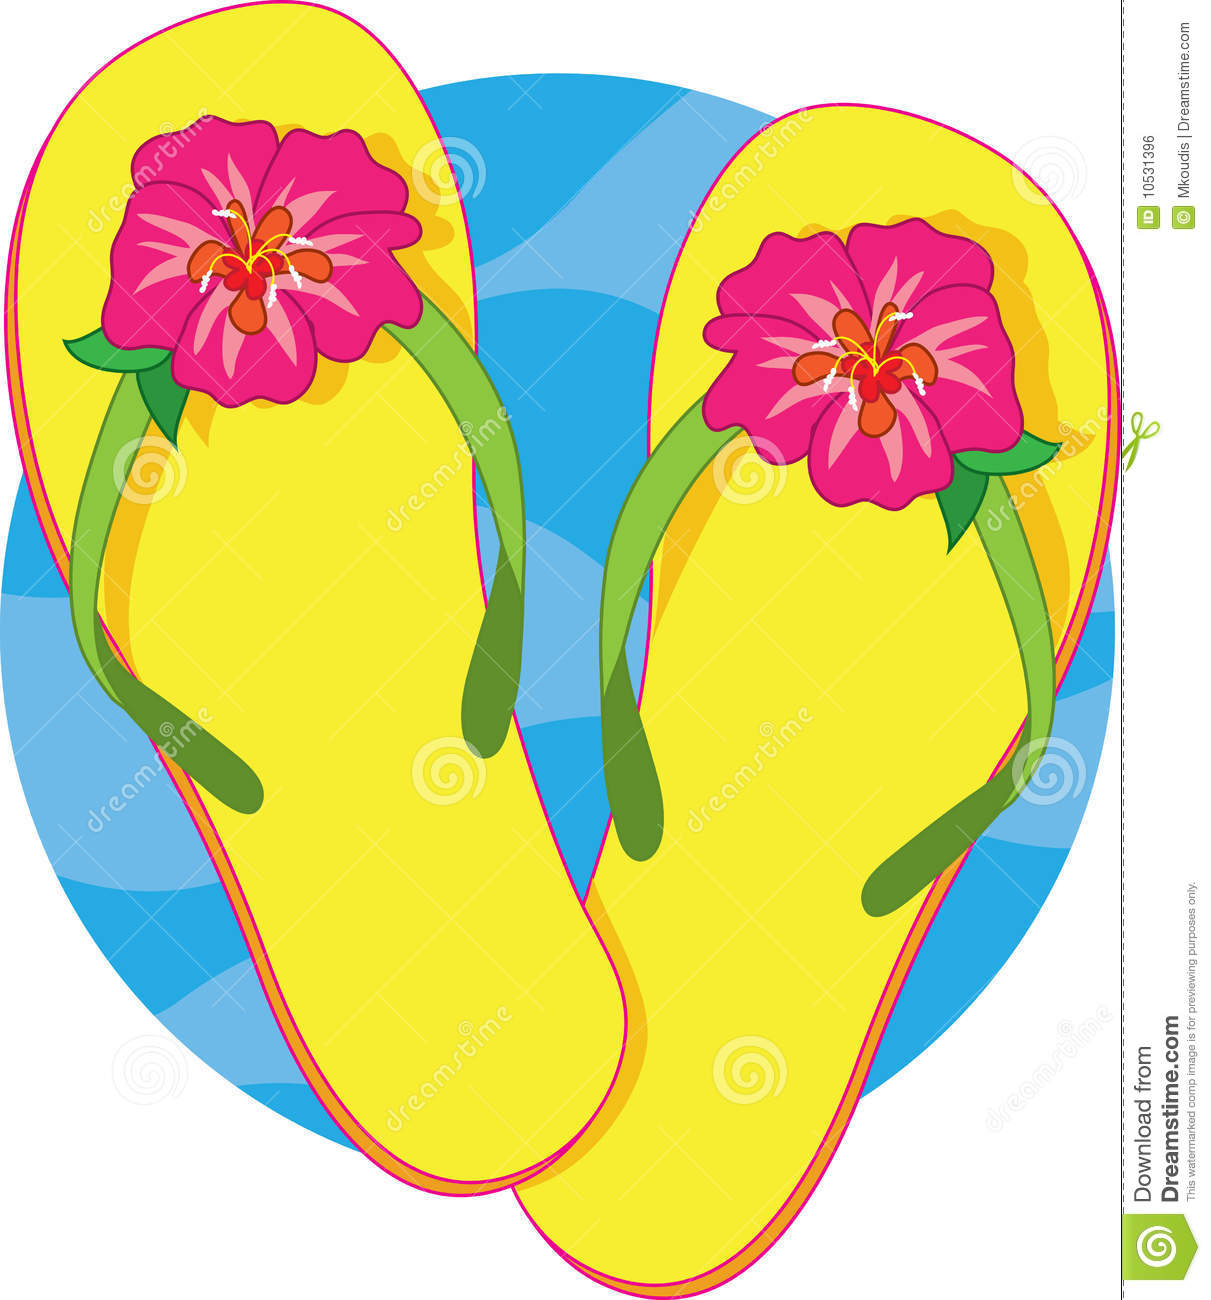 211 Sandals free clipart.